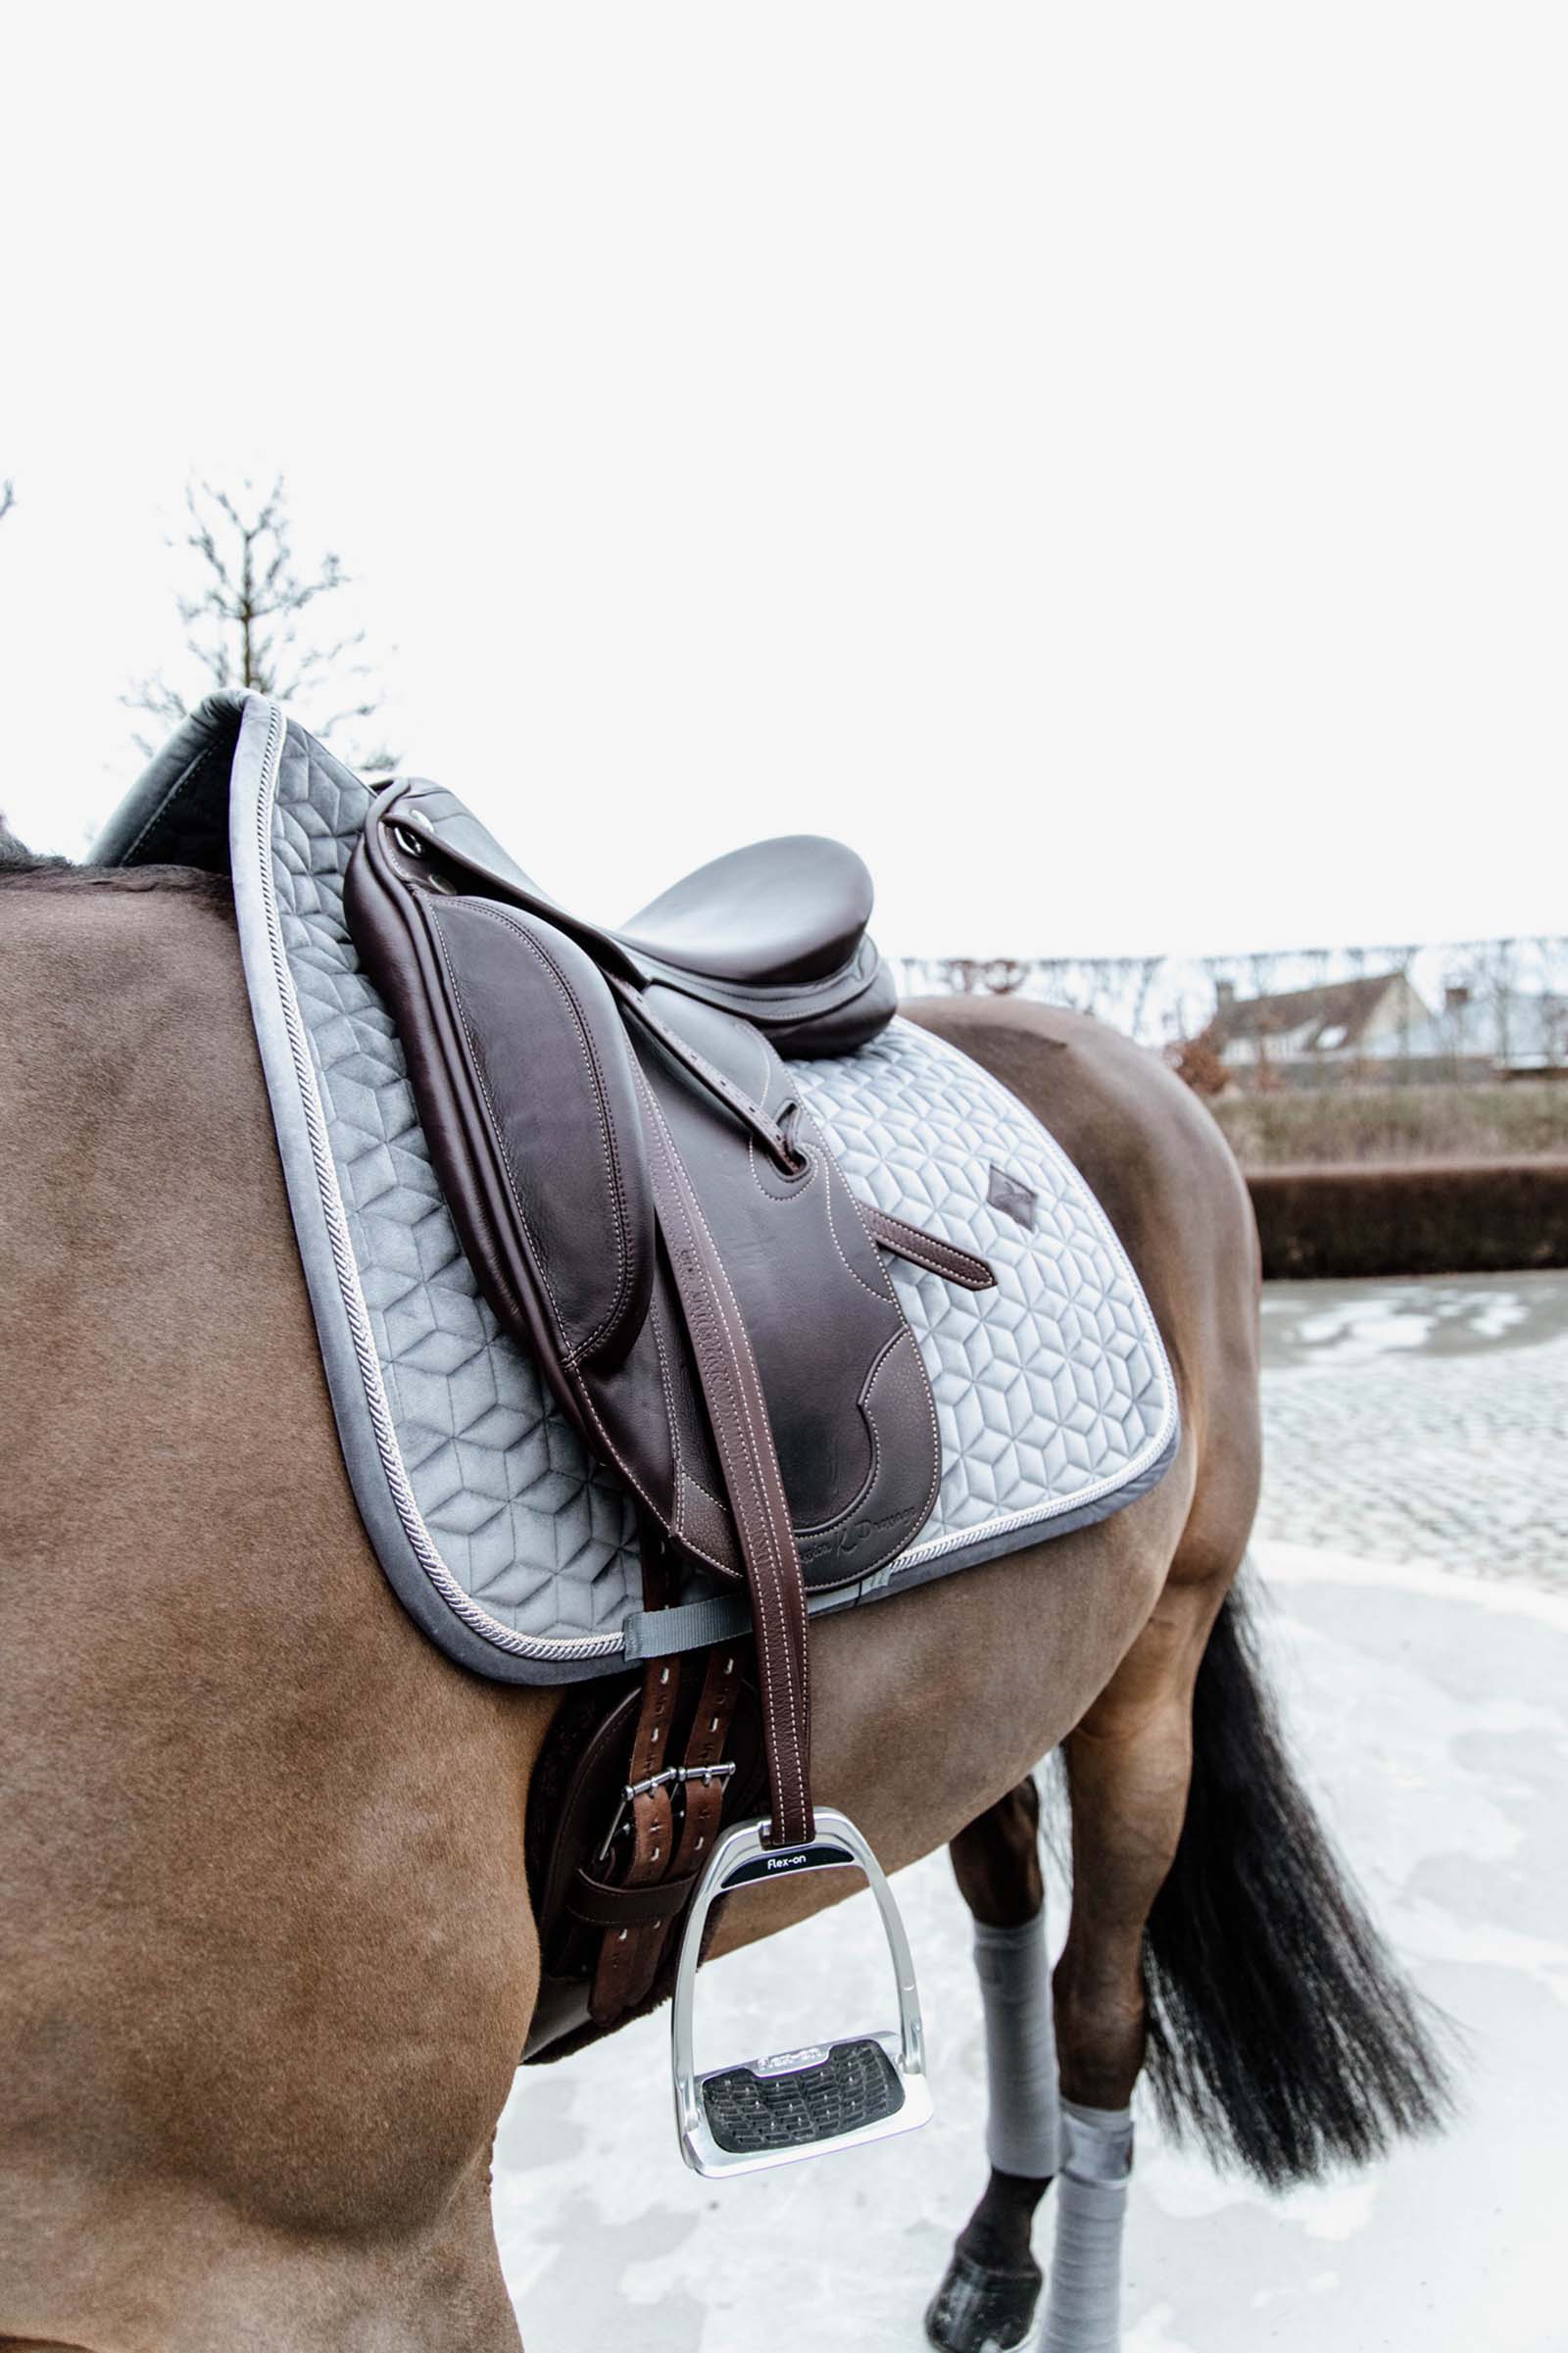 How To Get Horse Hair Out Of Saddle Pads